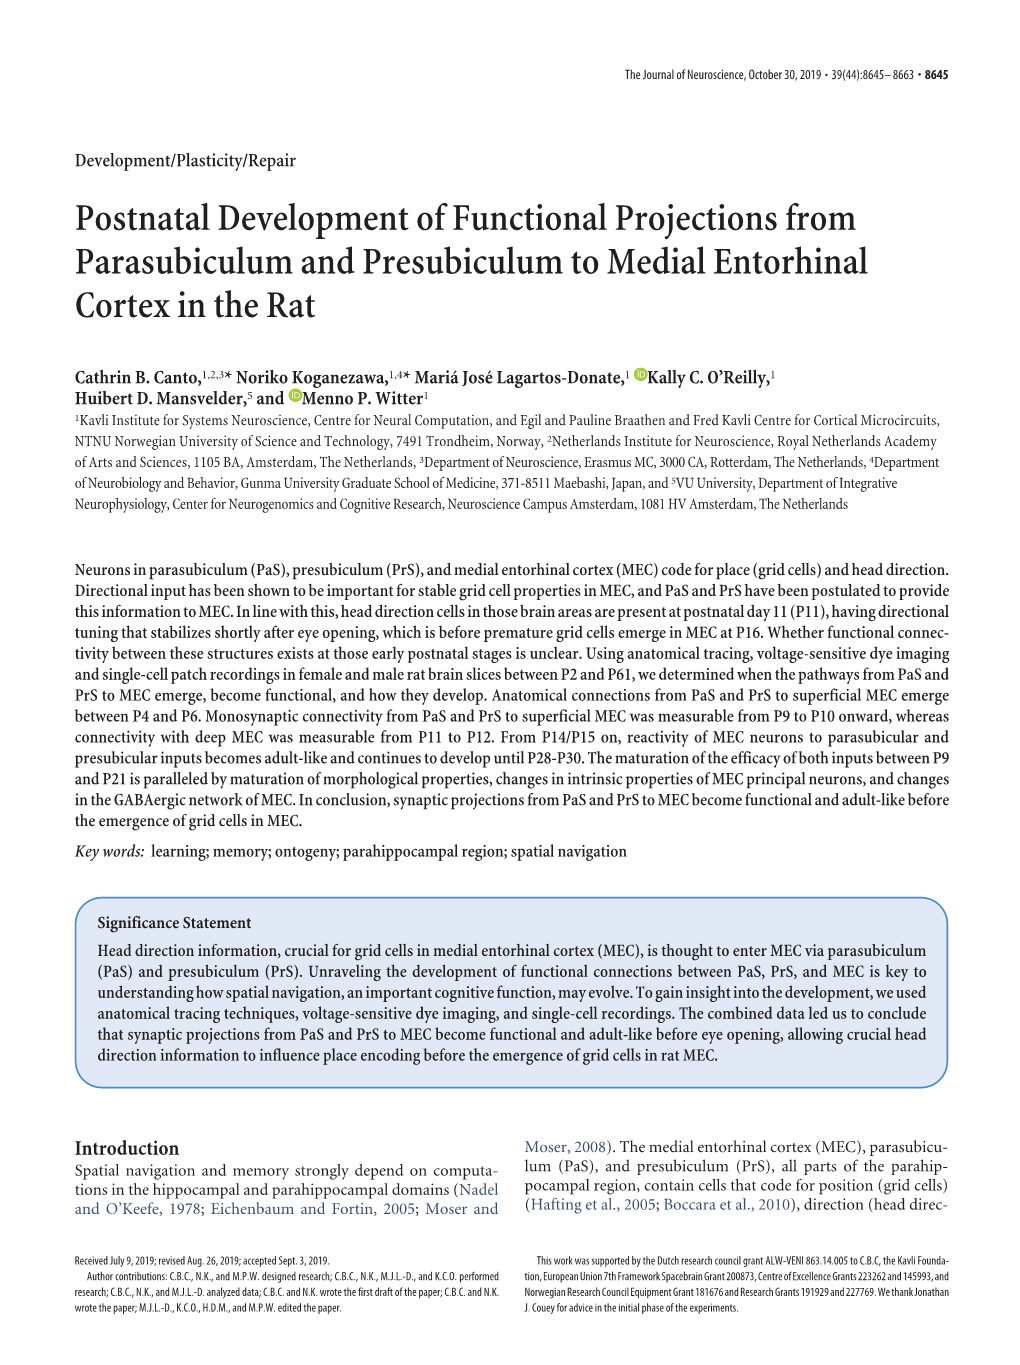 Postnatal Development of Functional Projections from Parasubiculum and Presubiculum to Medial Entorhinal Cortex in the Rat